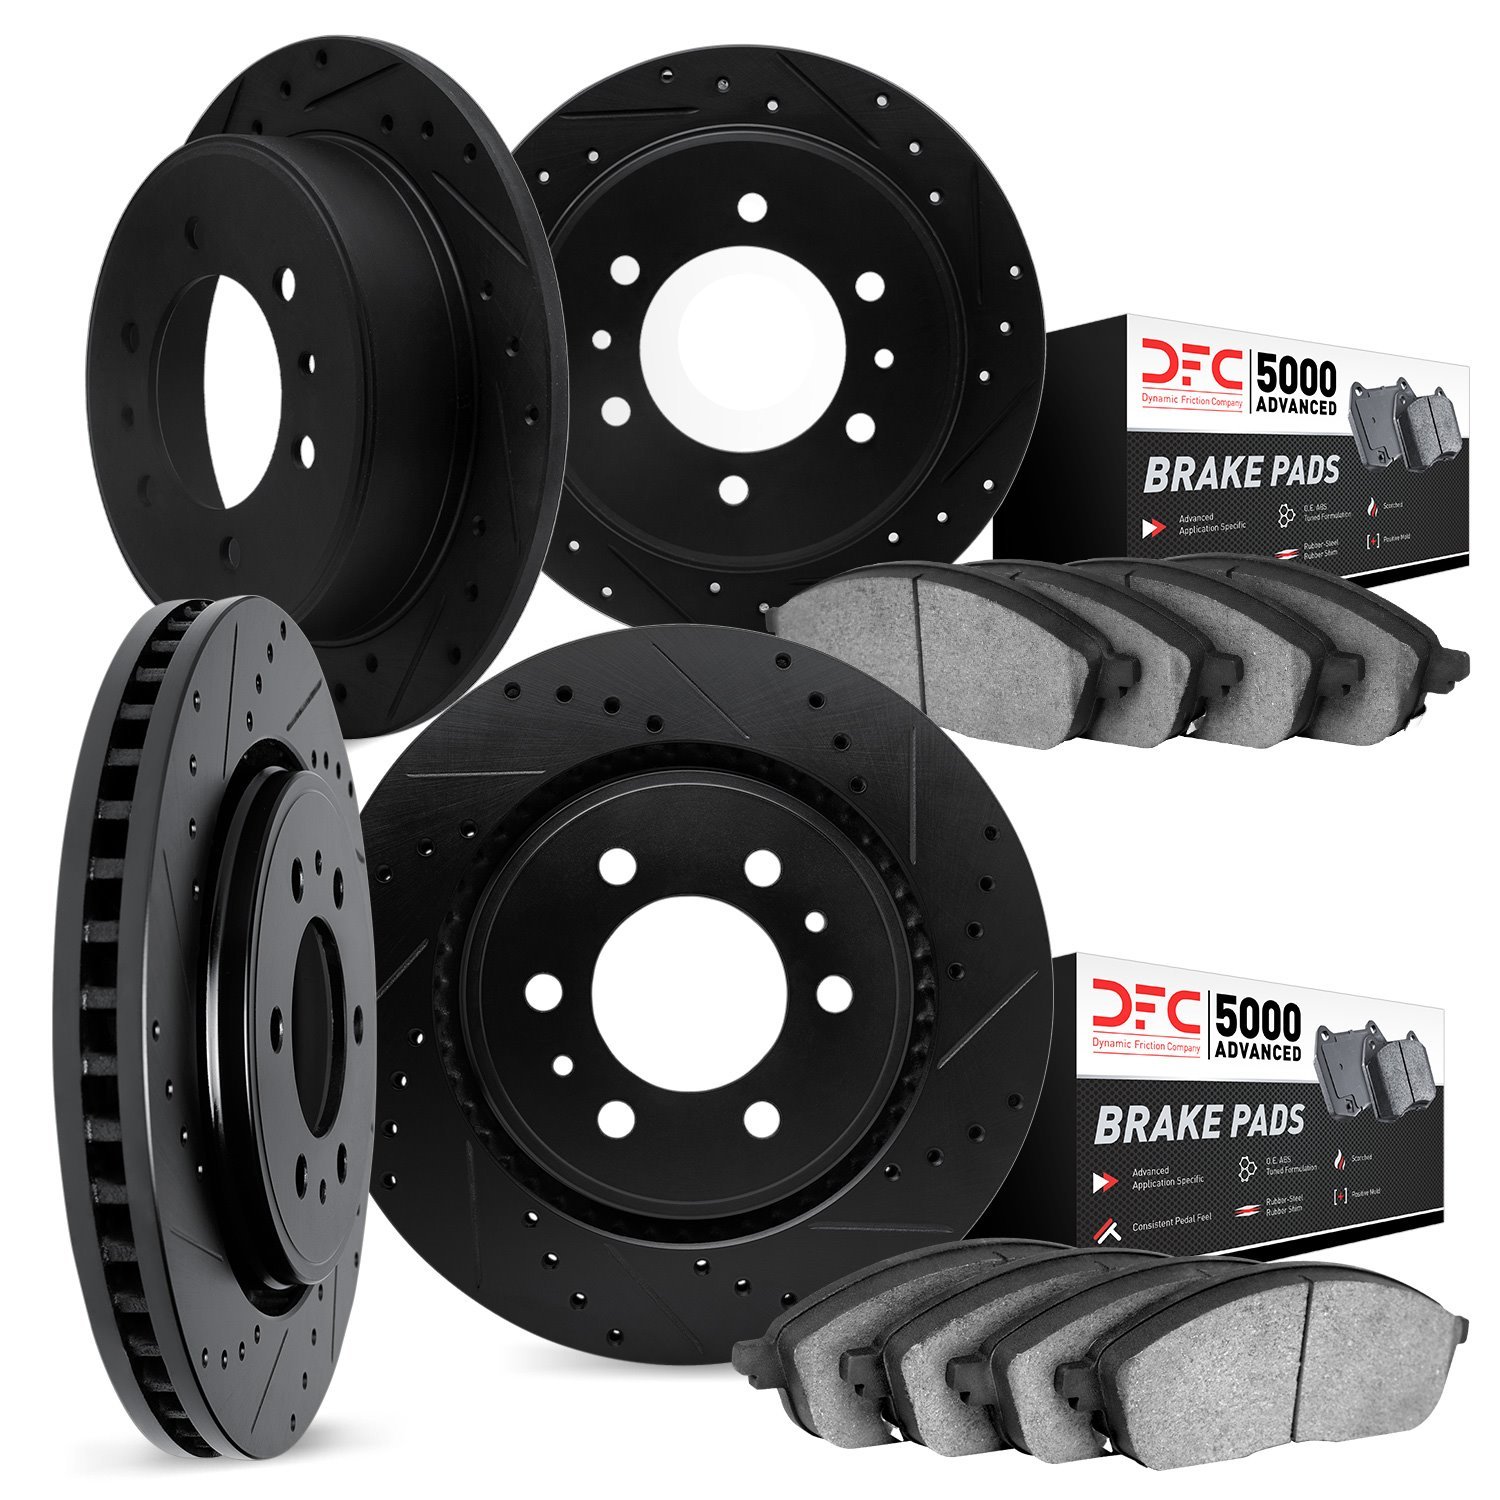 8504-23000 Drilled/Slotted Brake Rotors w/5000 Advanced Brake Pads Kit [Black], 1972-1979 Renault, Position: Front and Rear